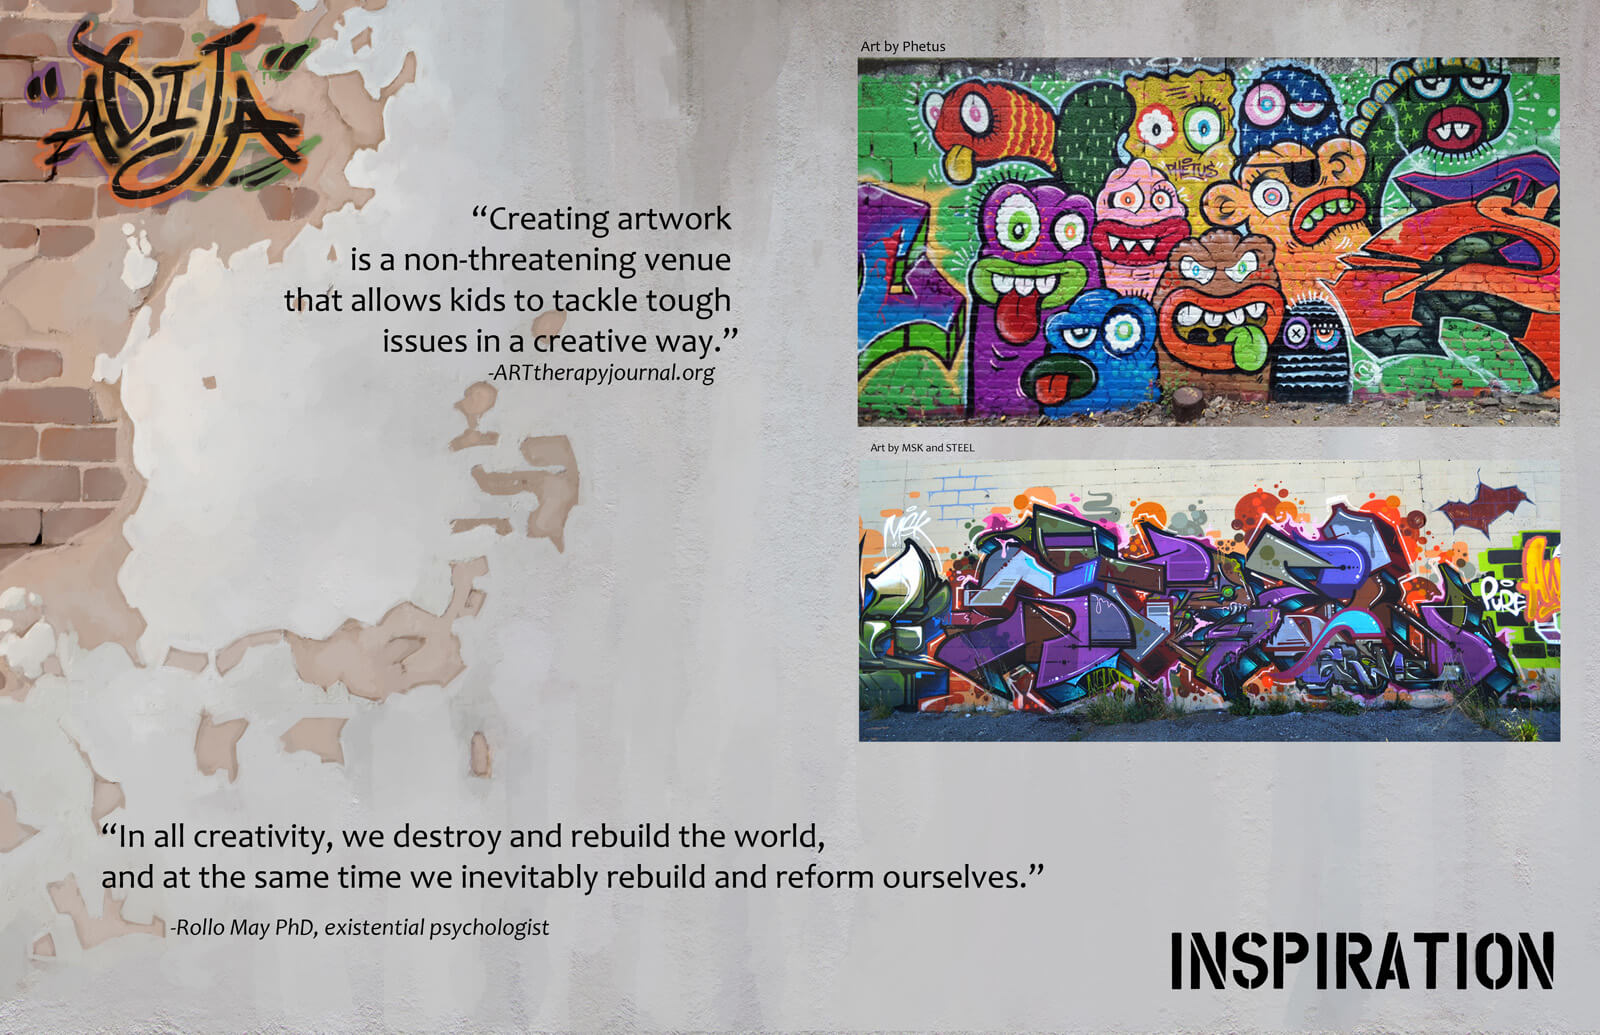 A presentation slide explaining the inspiration for the film Adija. Two images of colorful graffiti walls are seen.